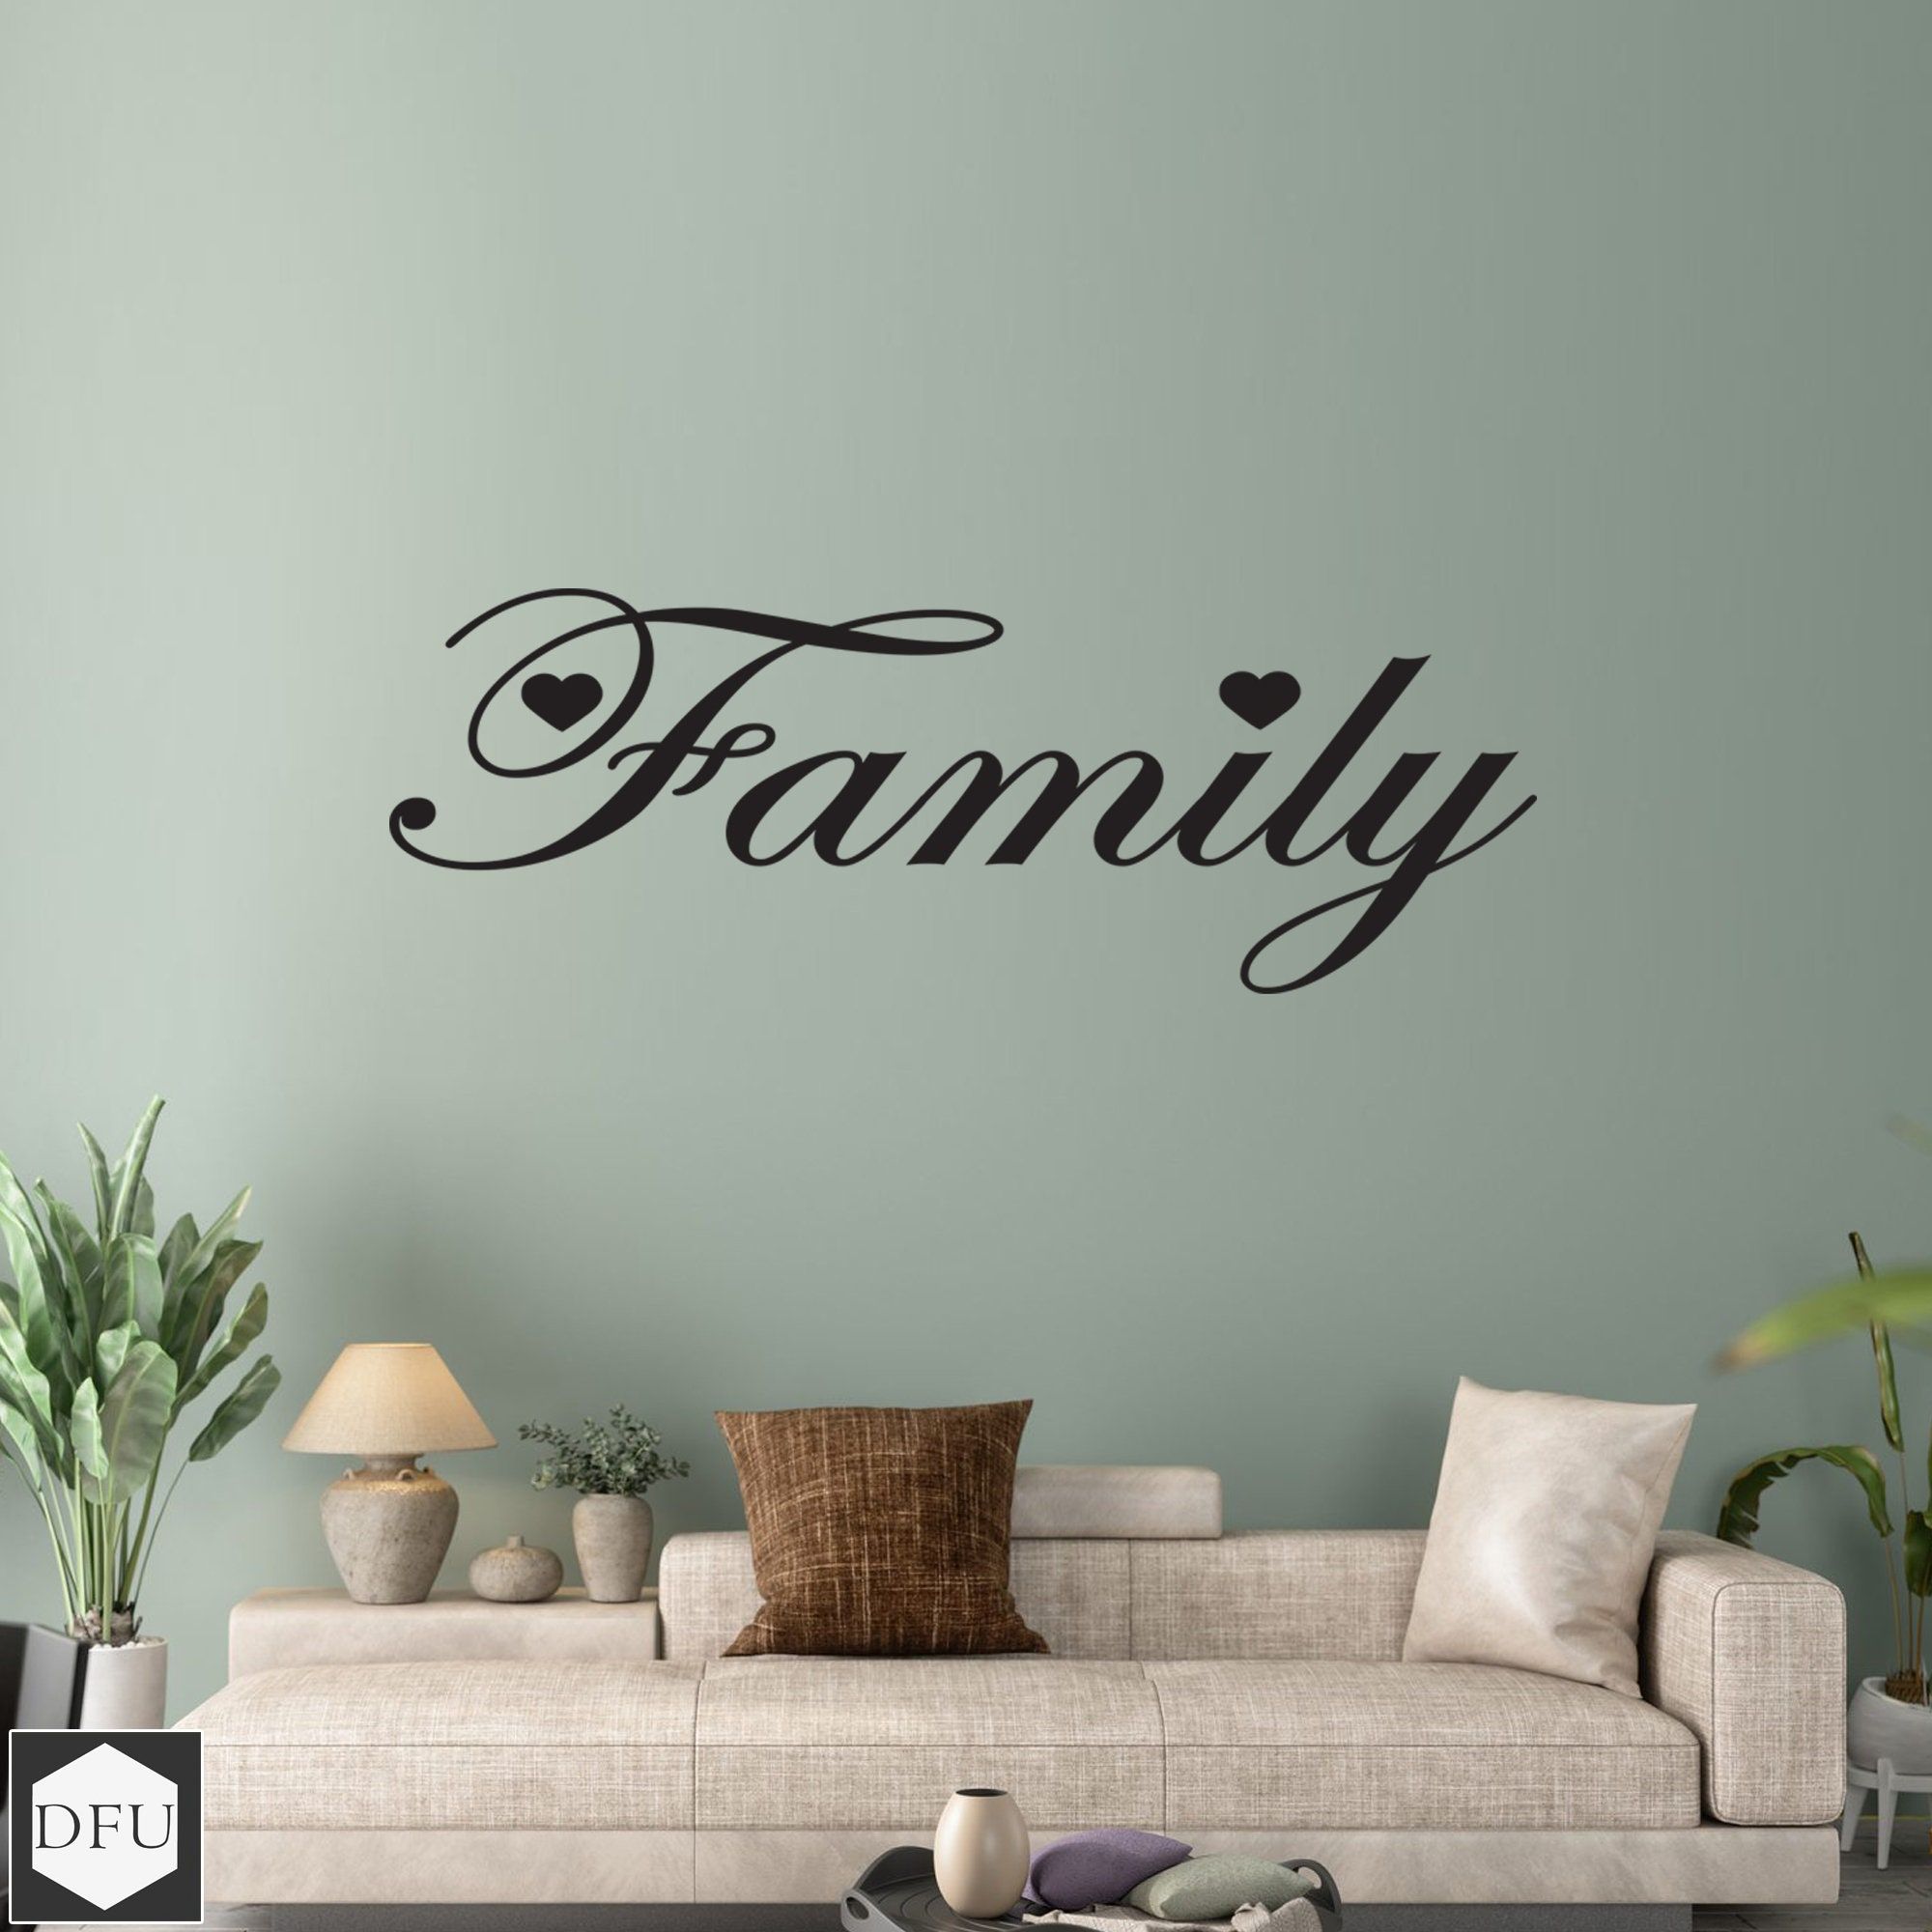 Family Word Wall Sticker Wall Art Decal Living Room – Etsy Pertaining To Recent Family Word Wall Art (View 9 of 20)